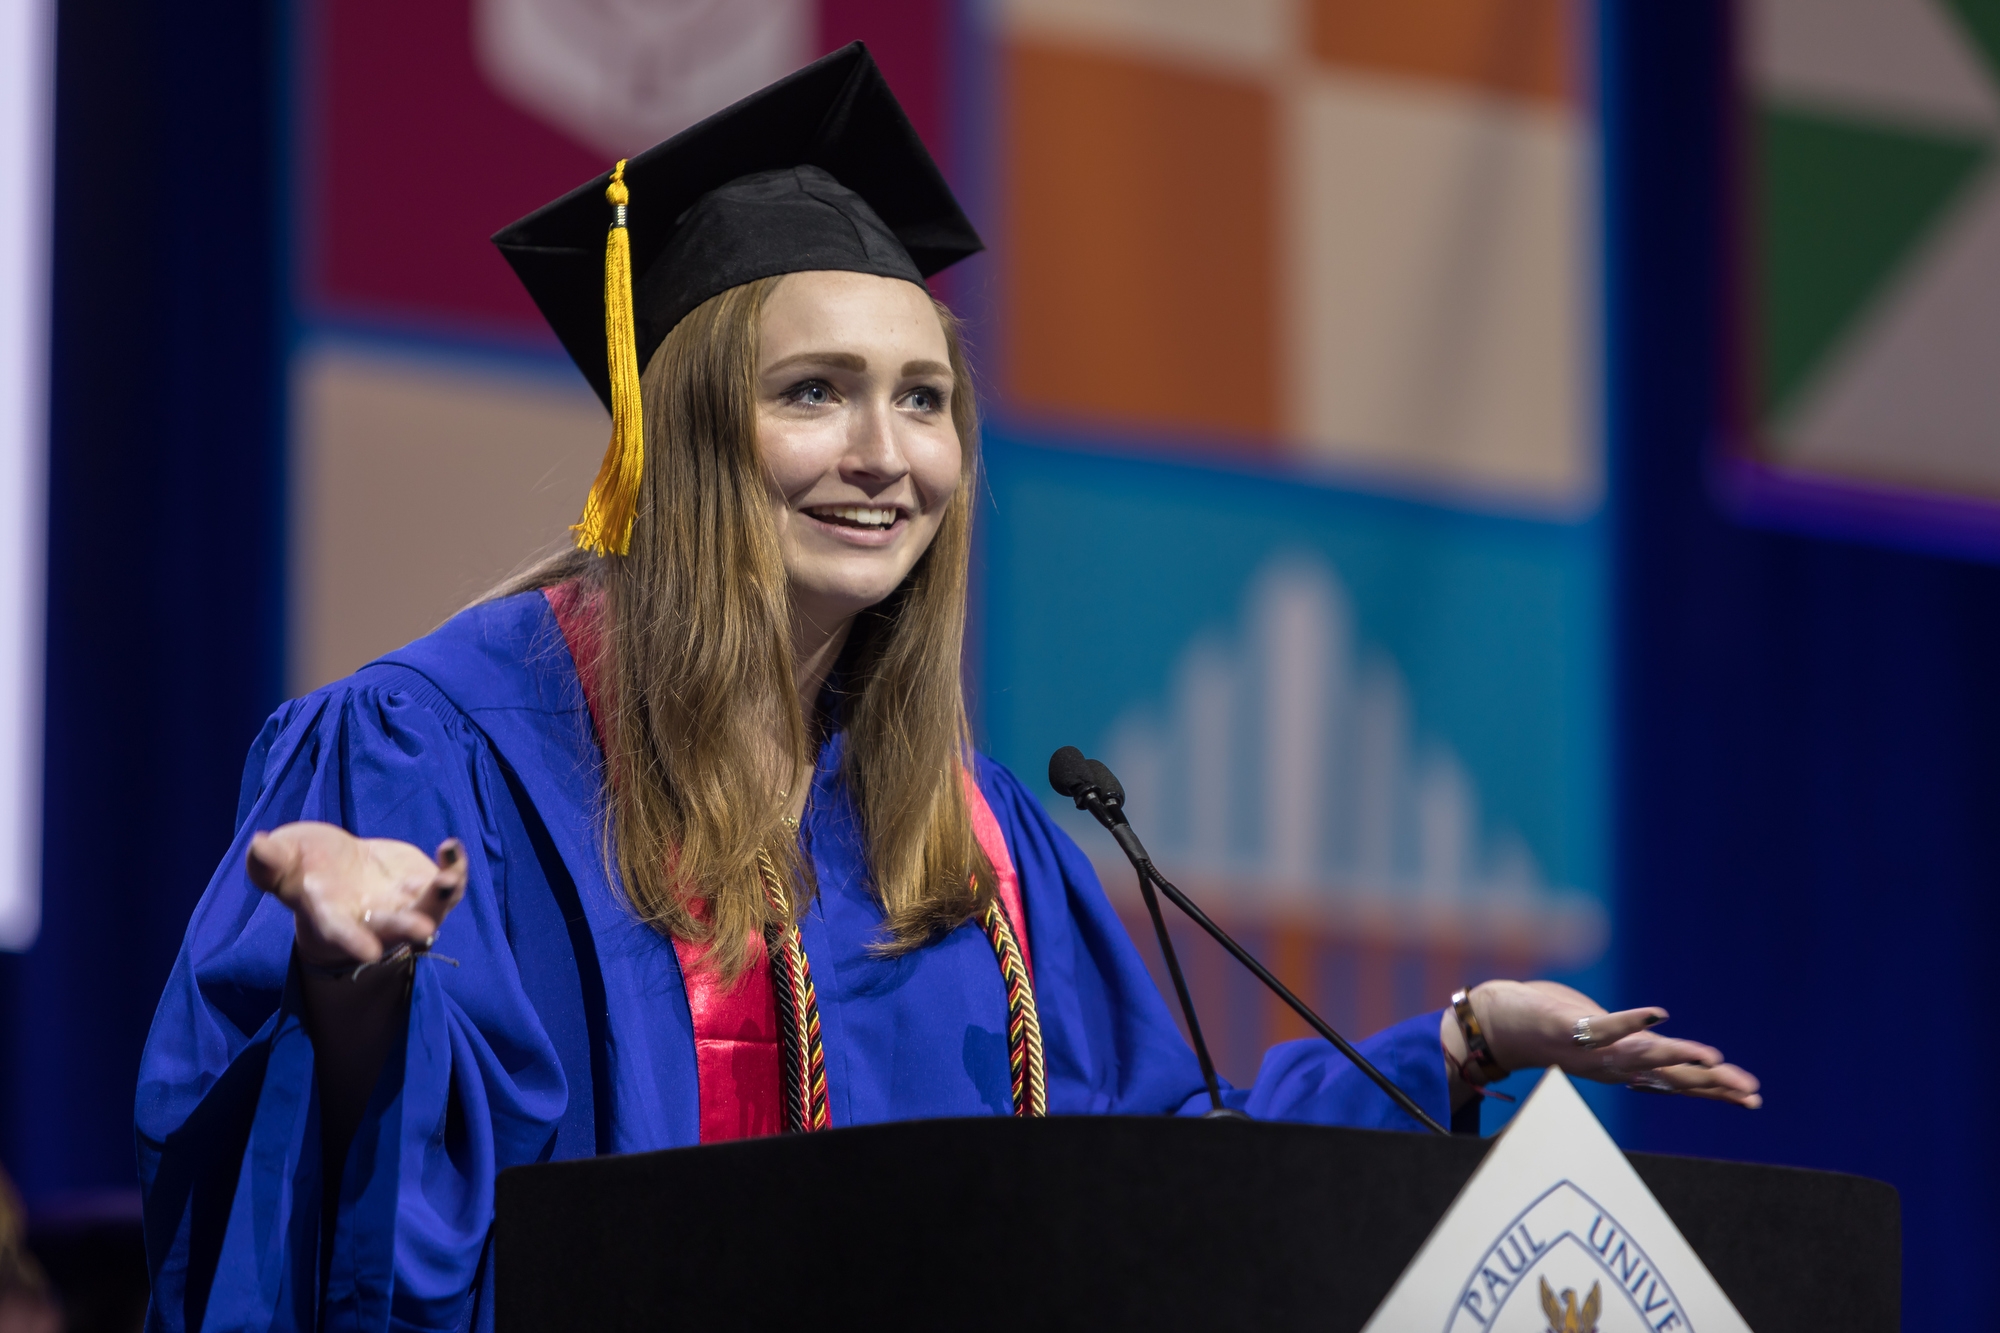 Rachel Pride delivers the student address at the DePaul University commencement ceremony for the College of Science and Health  and the College of Education. (DePaul University/Jeff Carrion)